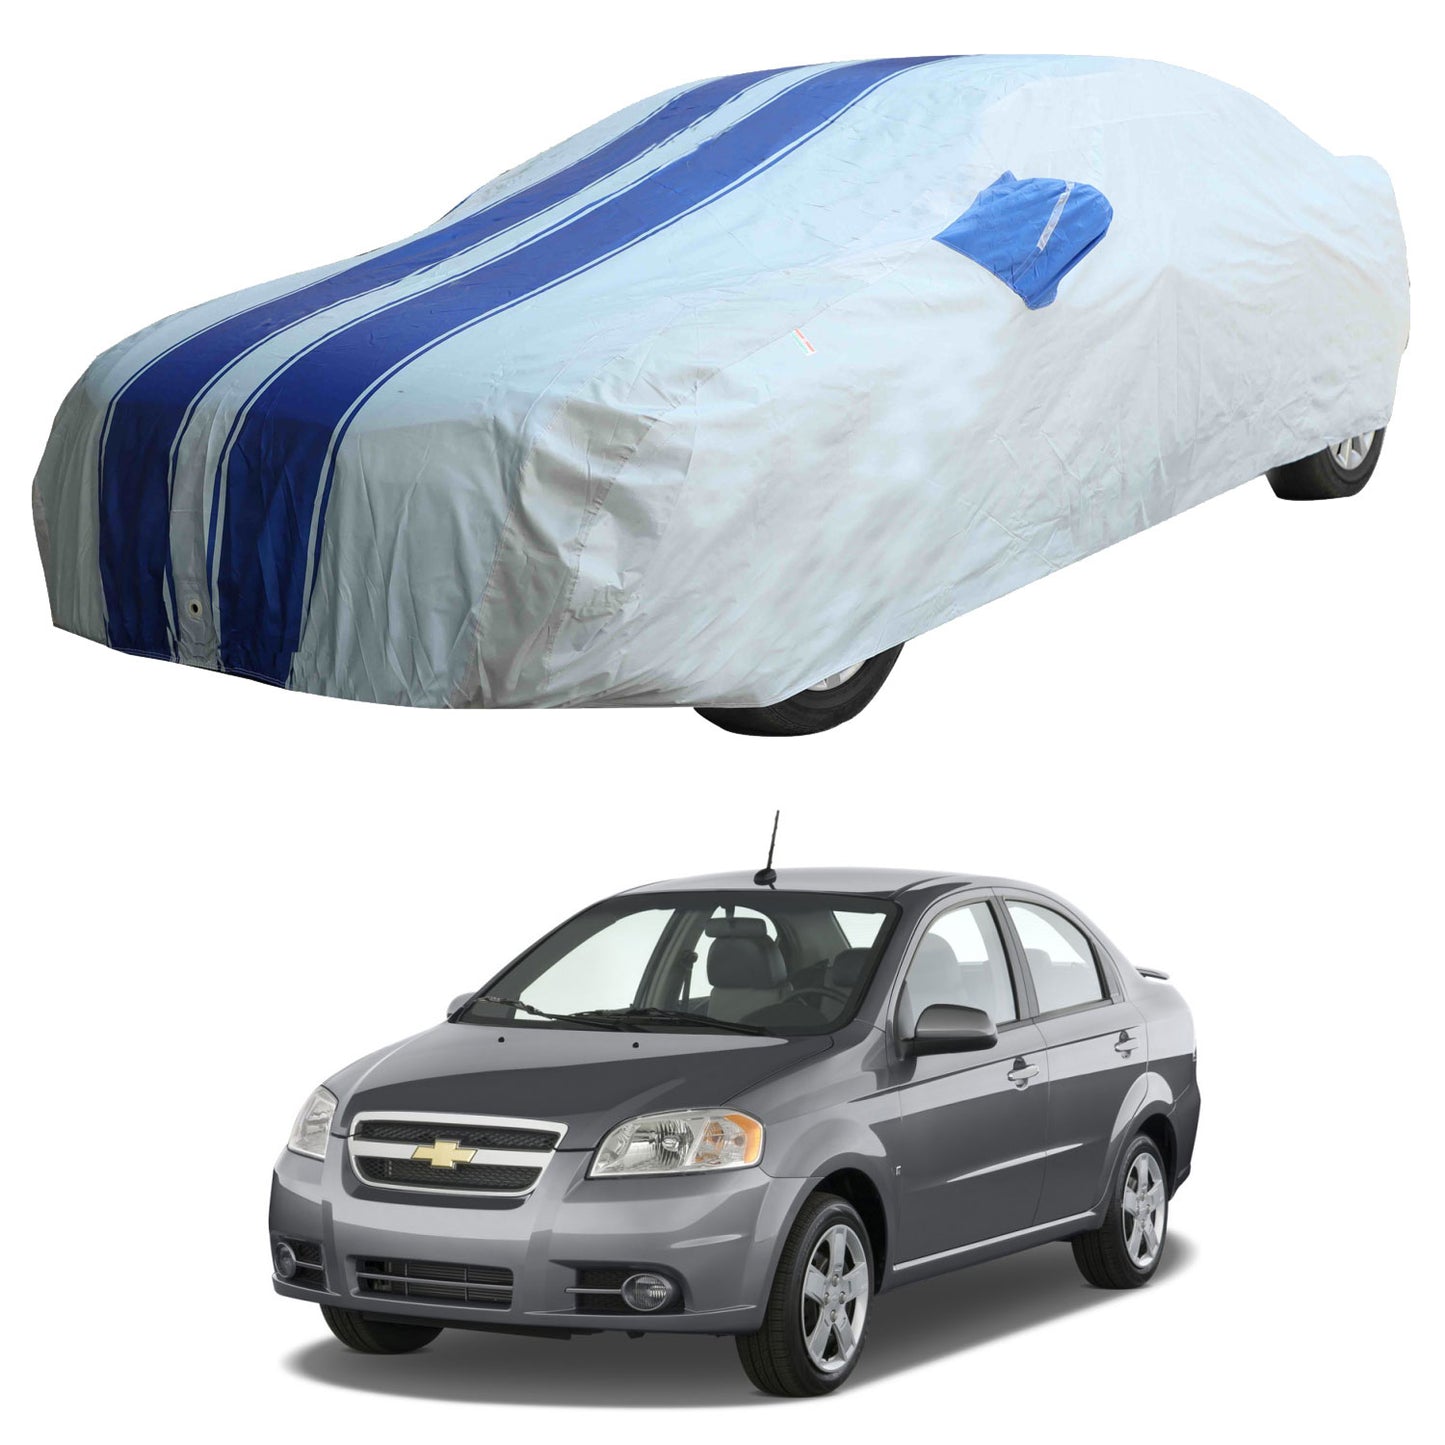 Oshotto 100% Blue dustproof and Water Resistant Car Body Cover with Mirror Pockets For Chevrolet Aveo